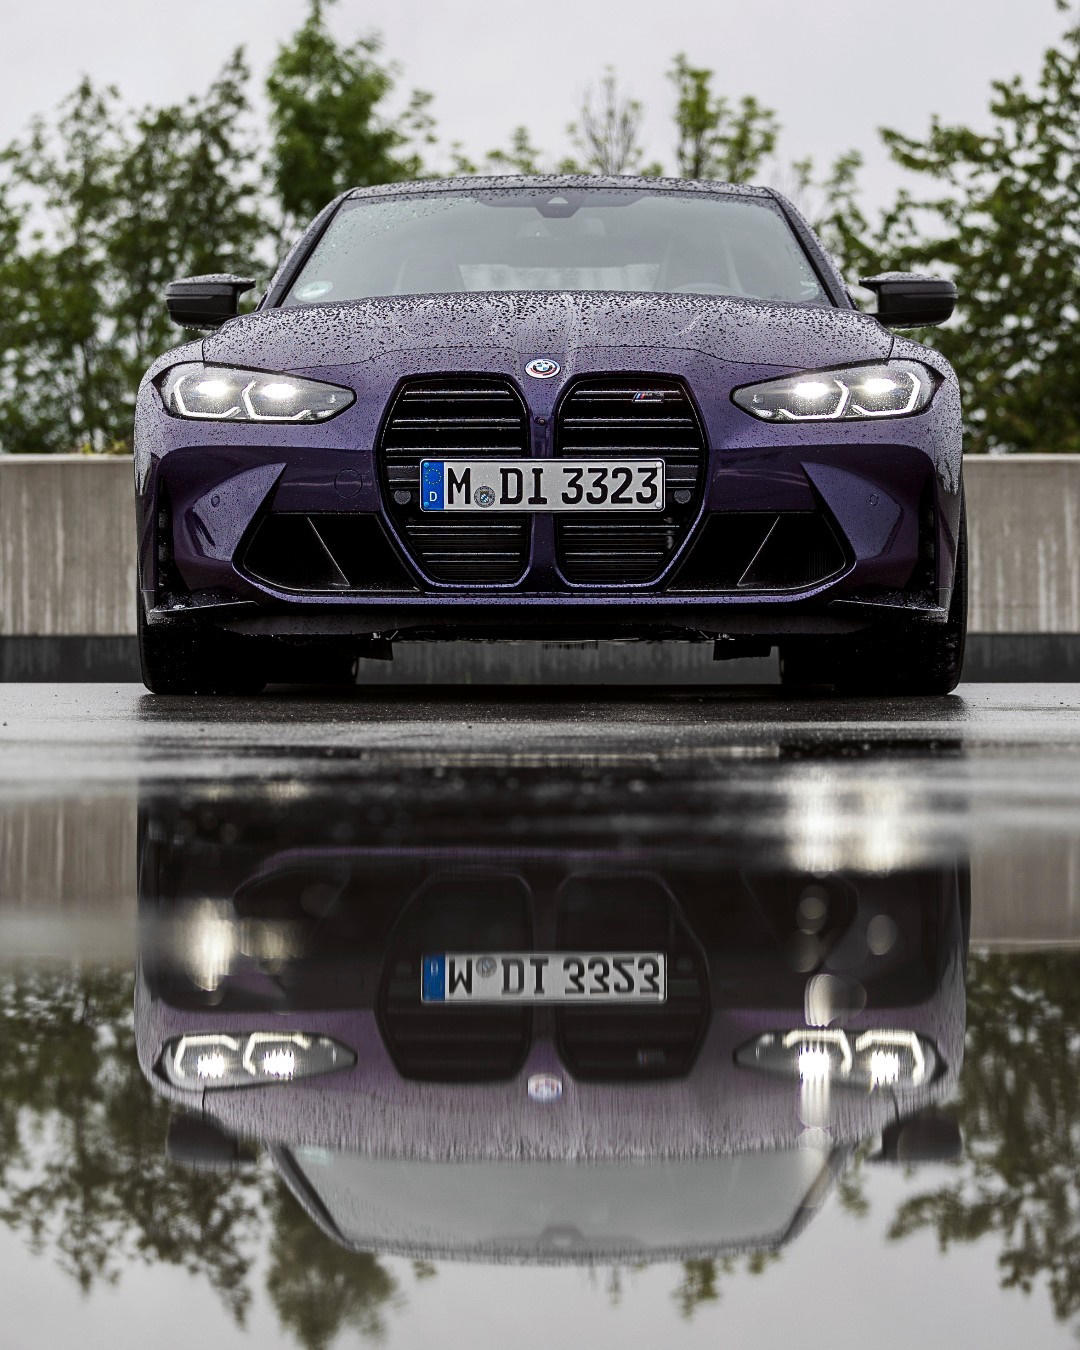 image  1 BMW - Reflect and connect